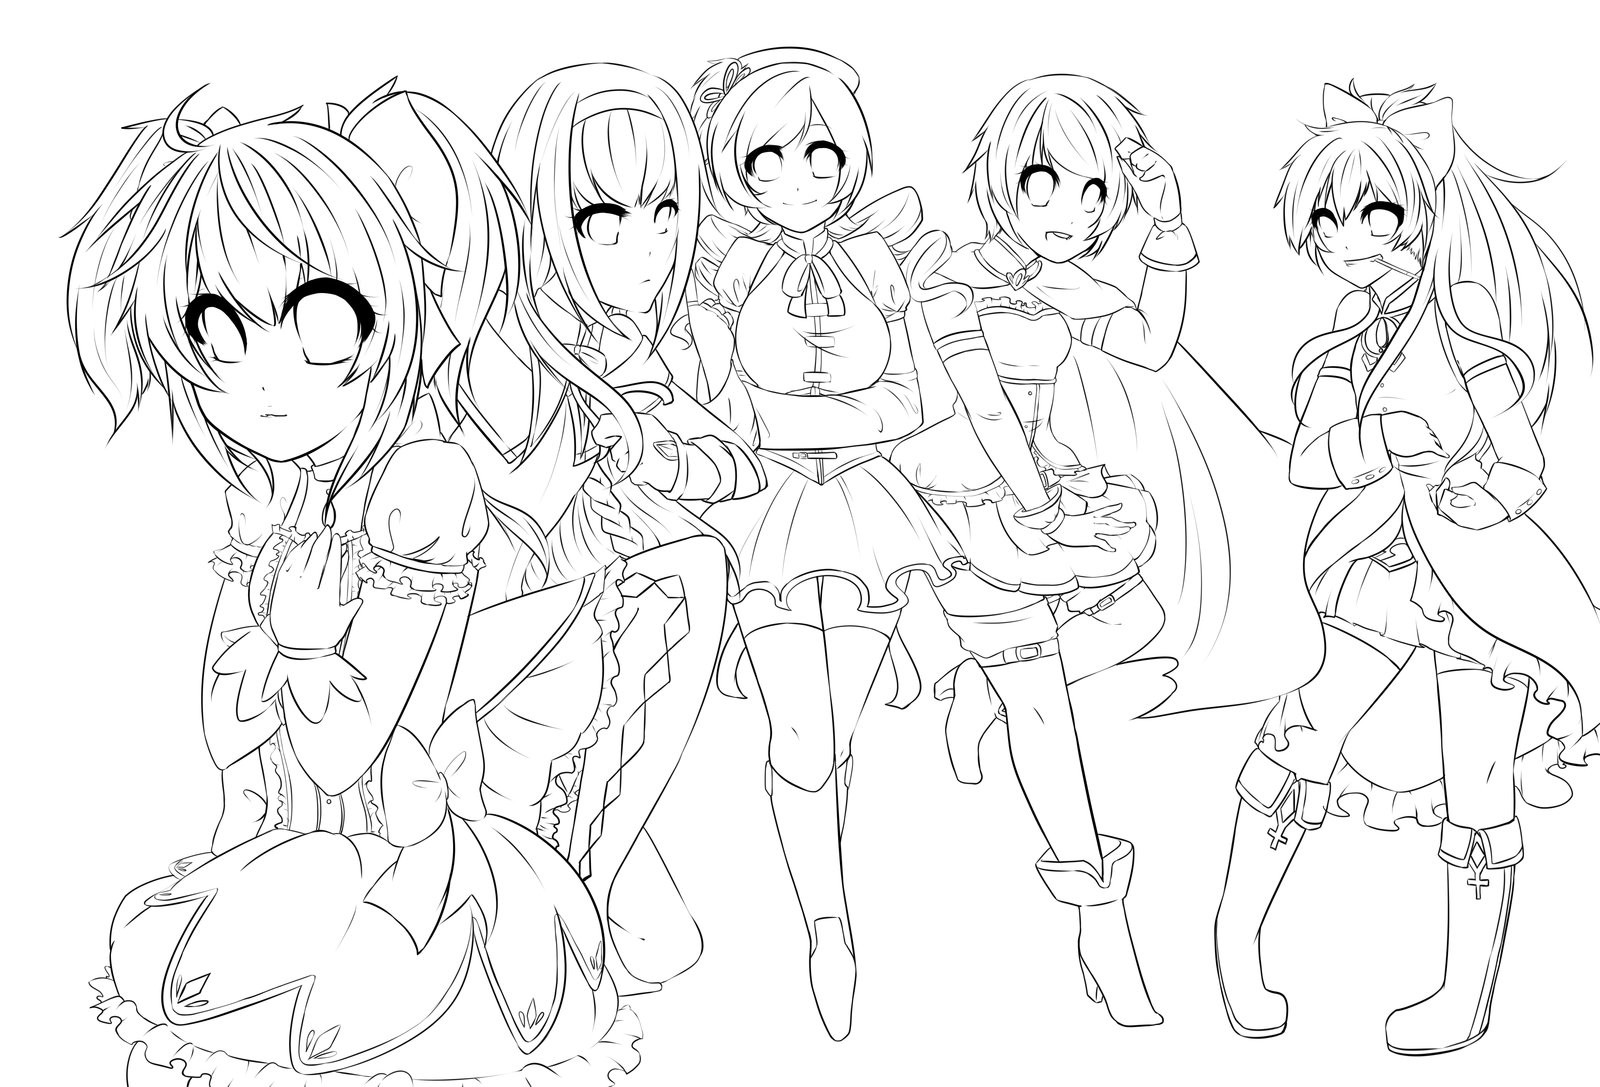 Anime Group Of Boys Coloring Pages
 Puella Magi Madoka Magica Collab Lineart by SapphieChan on